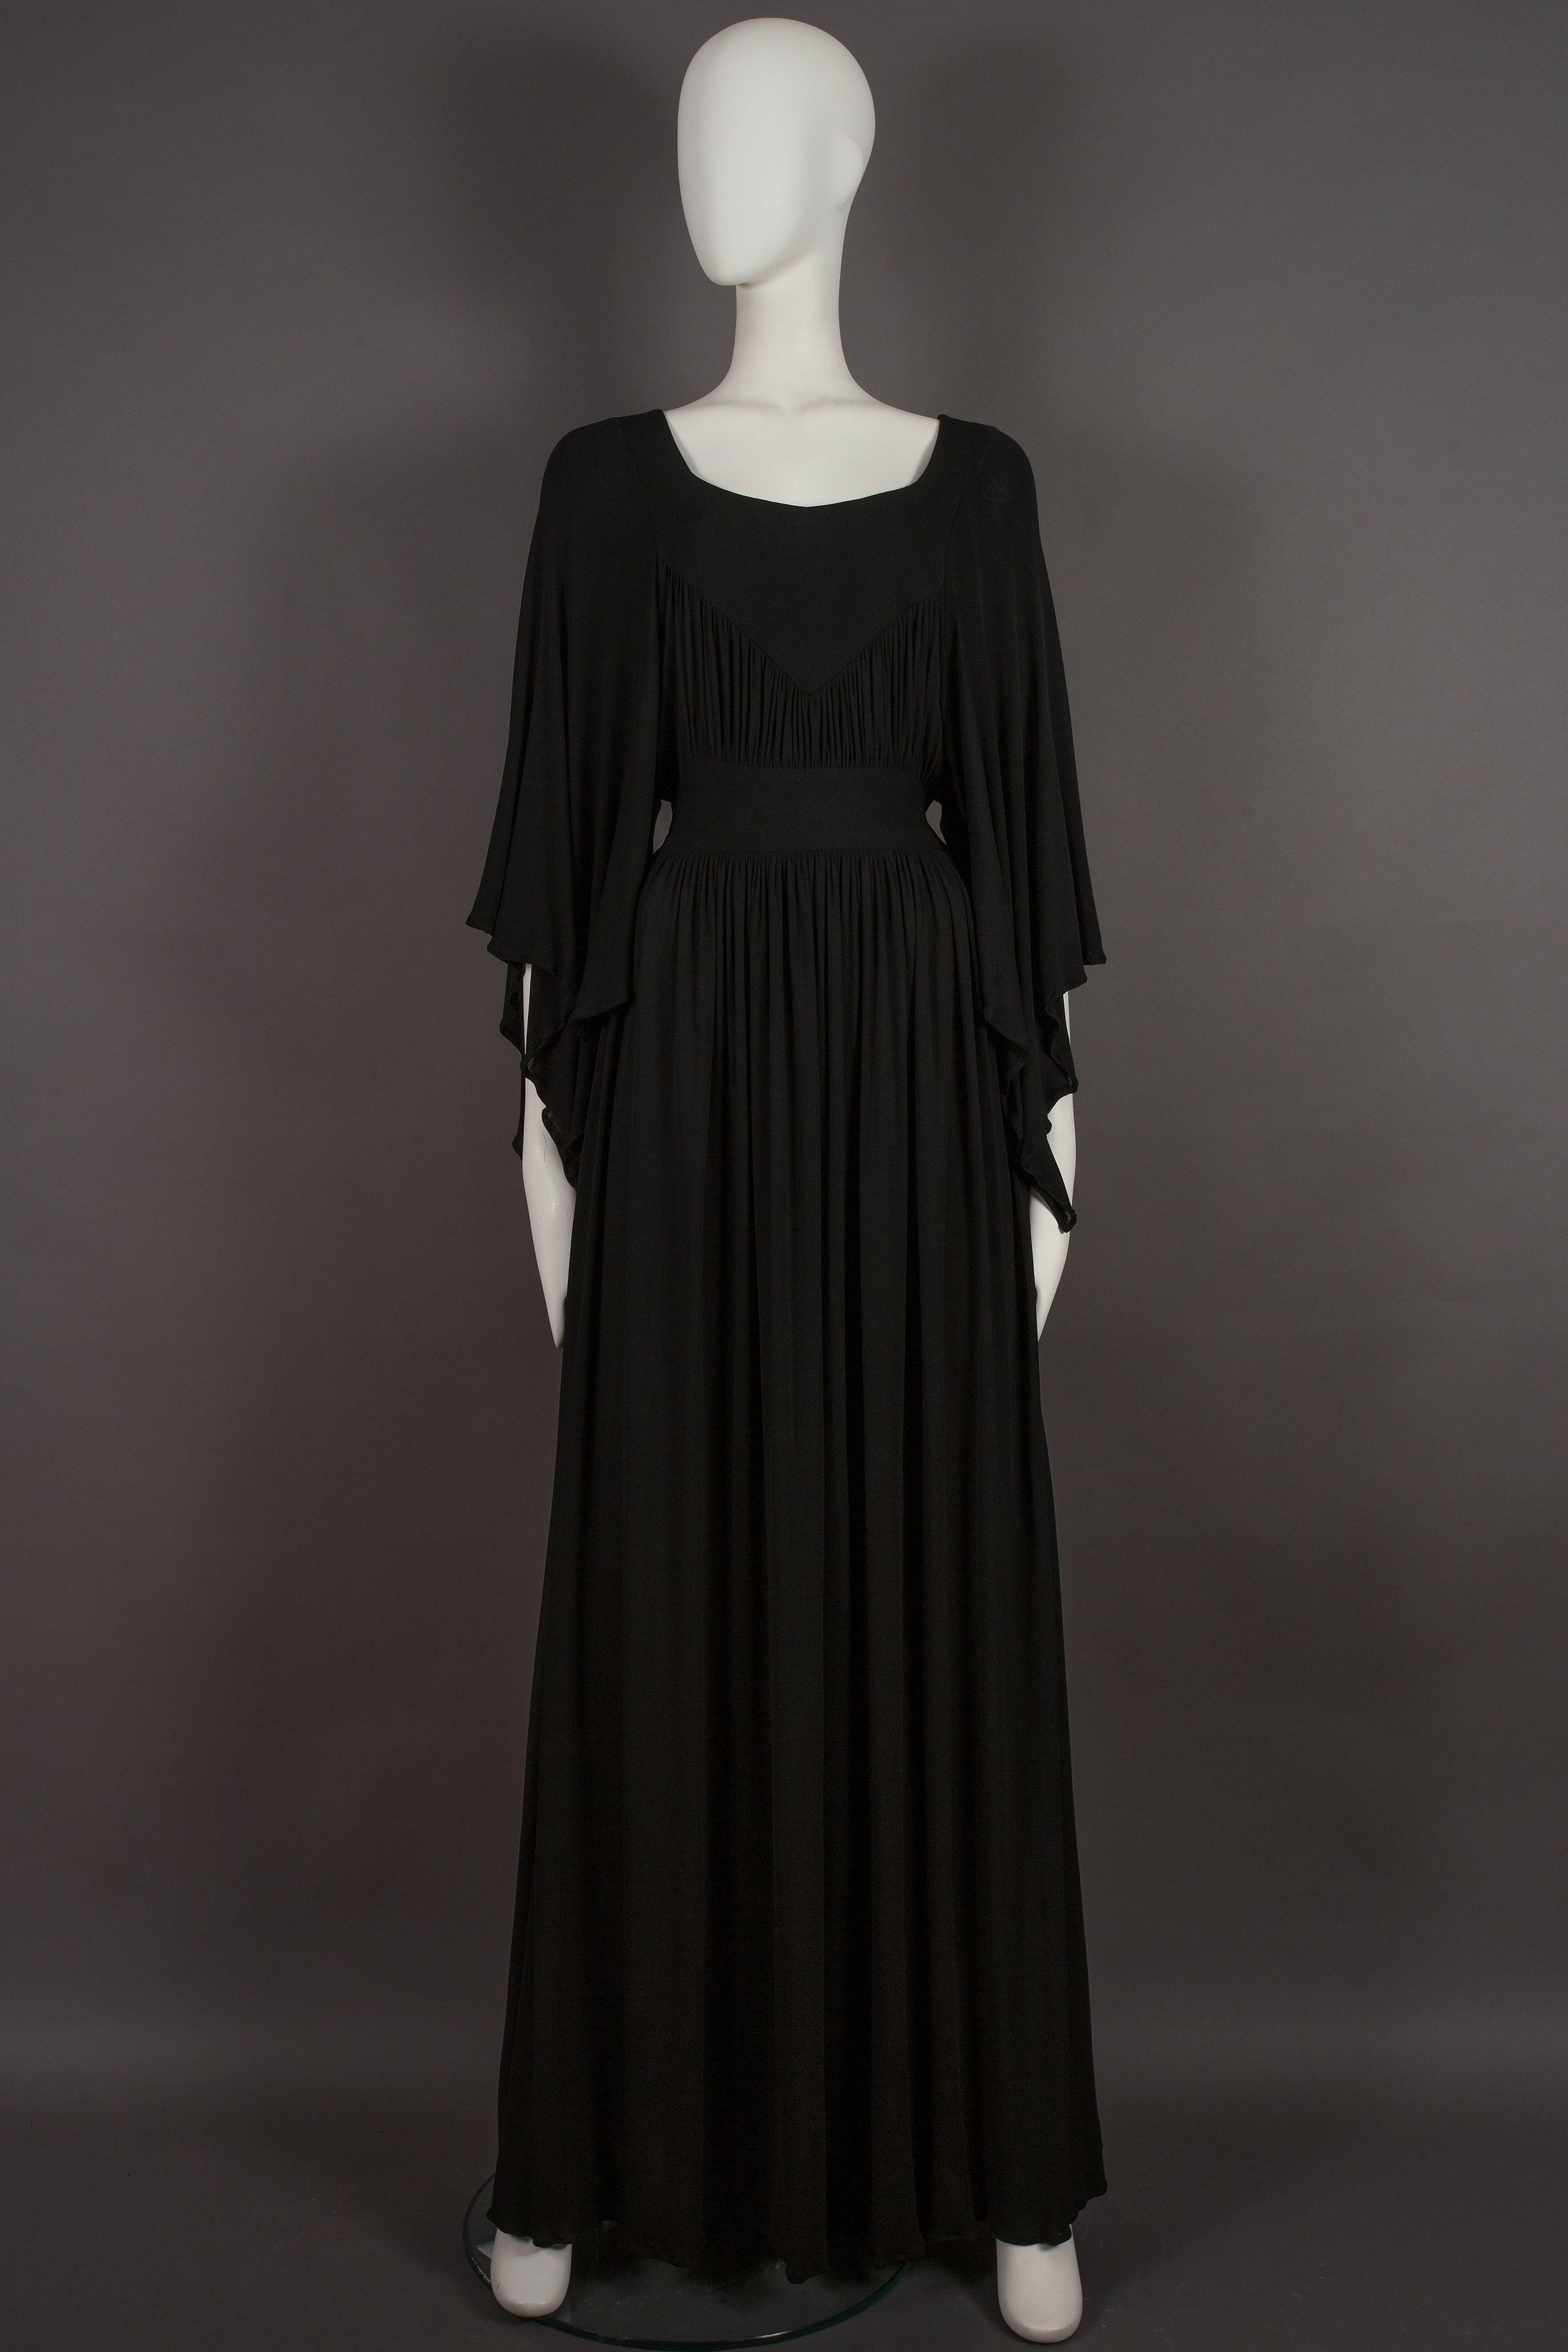 
Presenting an exceptionally rare and exquisite Ossie Clark for Quorum black jersey evening gown, a timeless treasure from the era of circa 1965-68. This gown is a true testament to the artistry of its designers and exudes an aura of elegance and